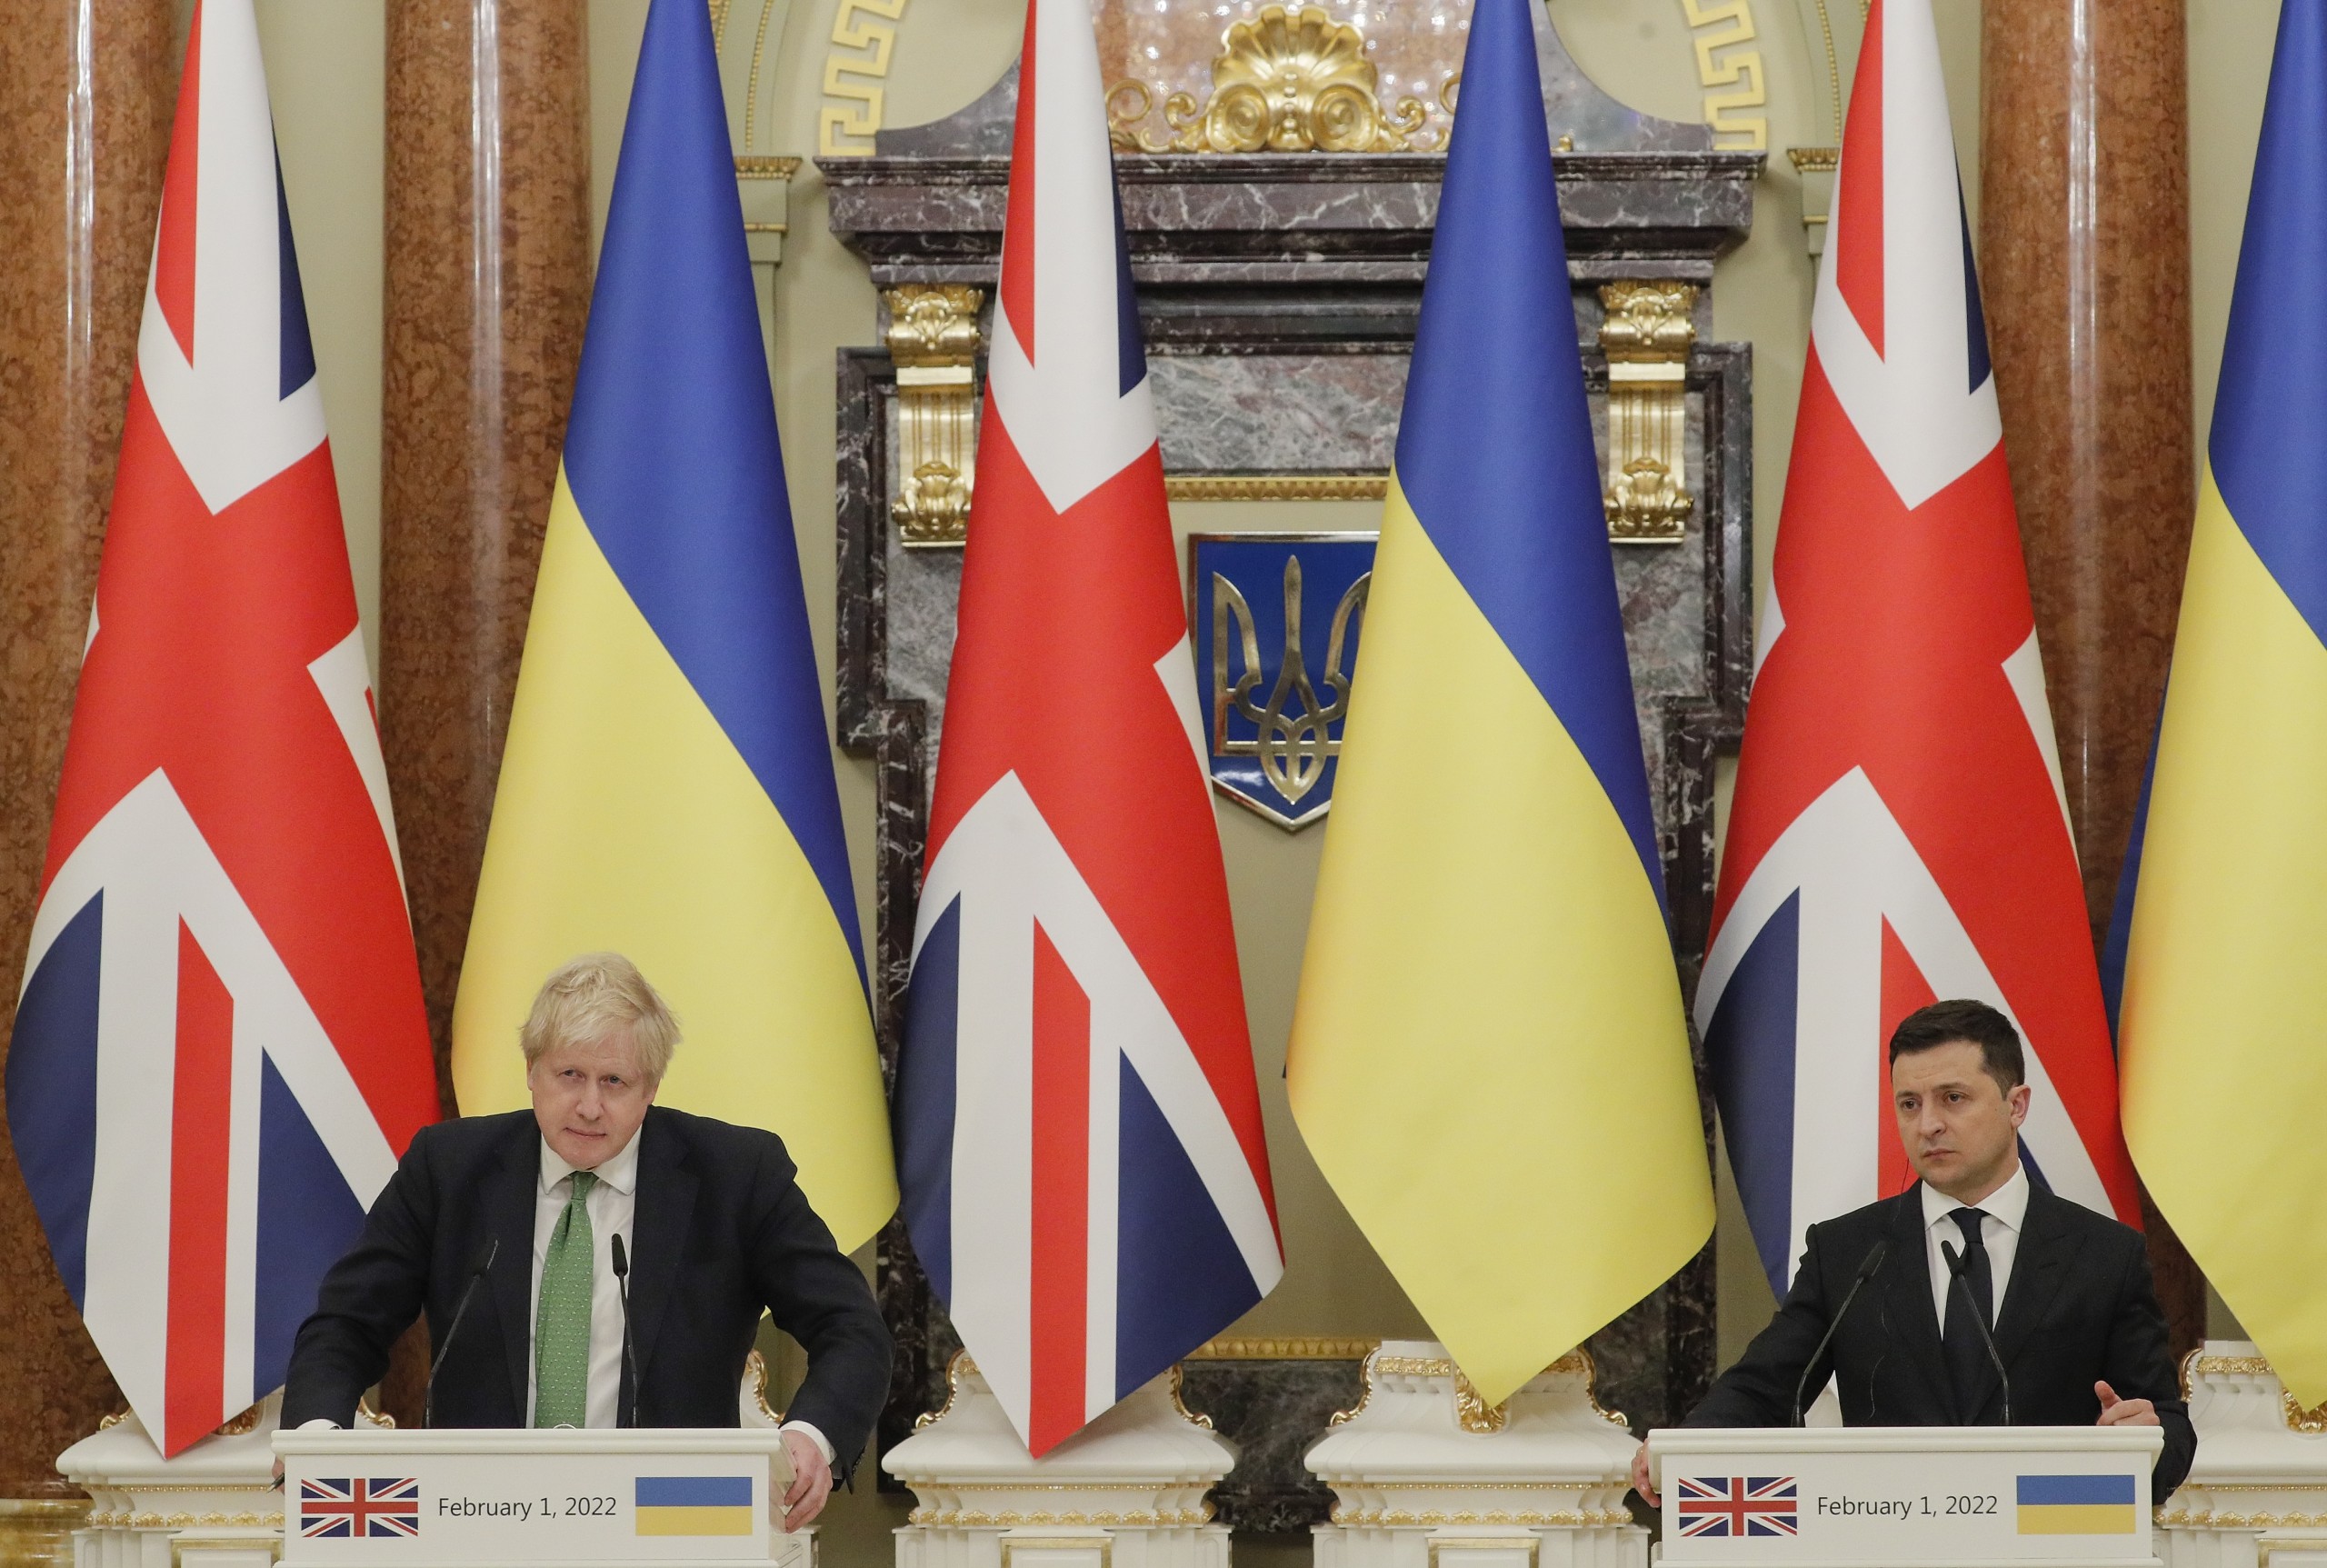 epa09721692 Ukrainian President Volodymyr Zelensky (R) and British Prime Minister Boris Johnson (L) attend a press conference following their talks at the Mariinsky palace in Kiev, Ukraine, 01 February 2022. Boris Johnson, the Prime Minister of the United Kingdom, arrived in Ukraine for a two-day visit to meet with top Ukrainian officials amid escalation on the Ukraine-Russian border.  EPA/SERGEY DOLZHENKO